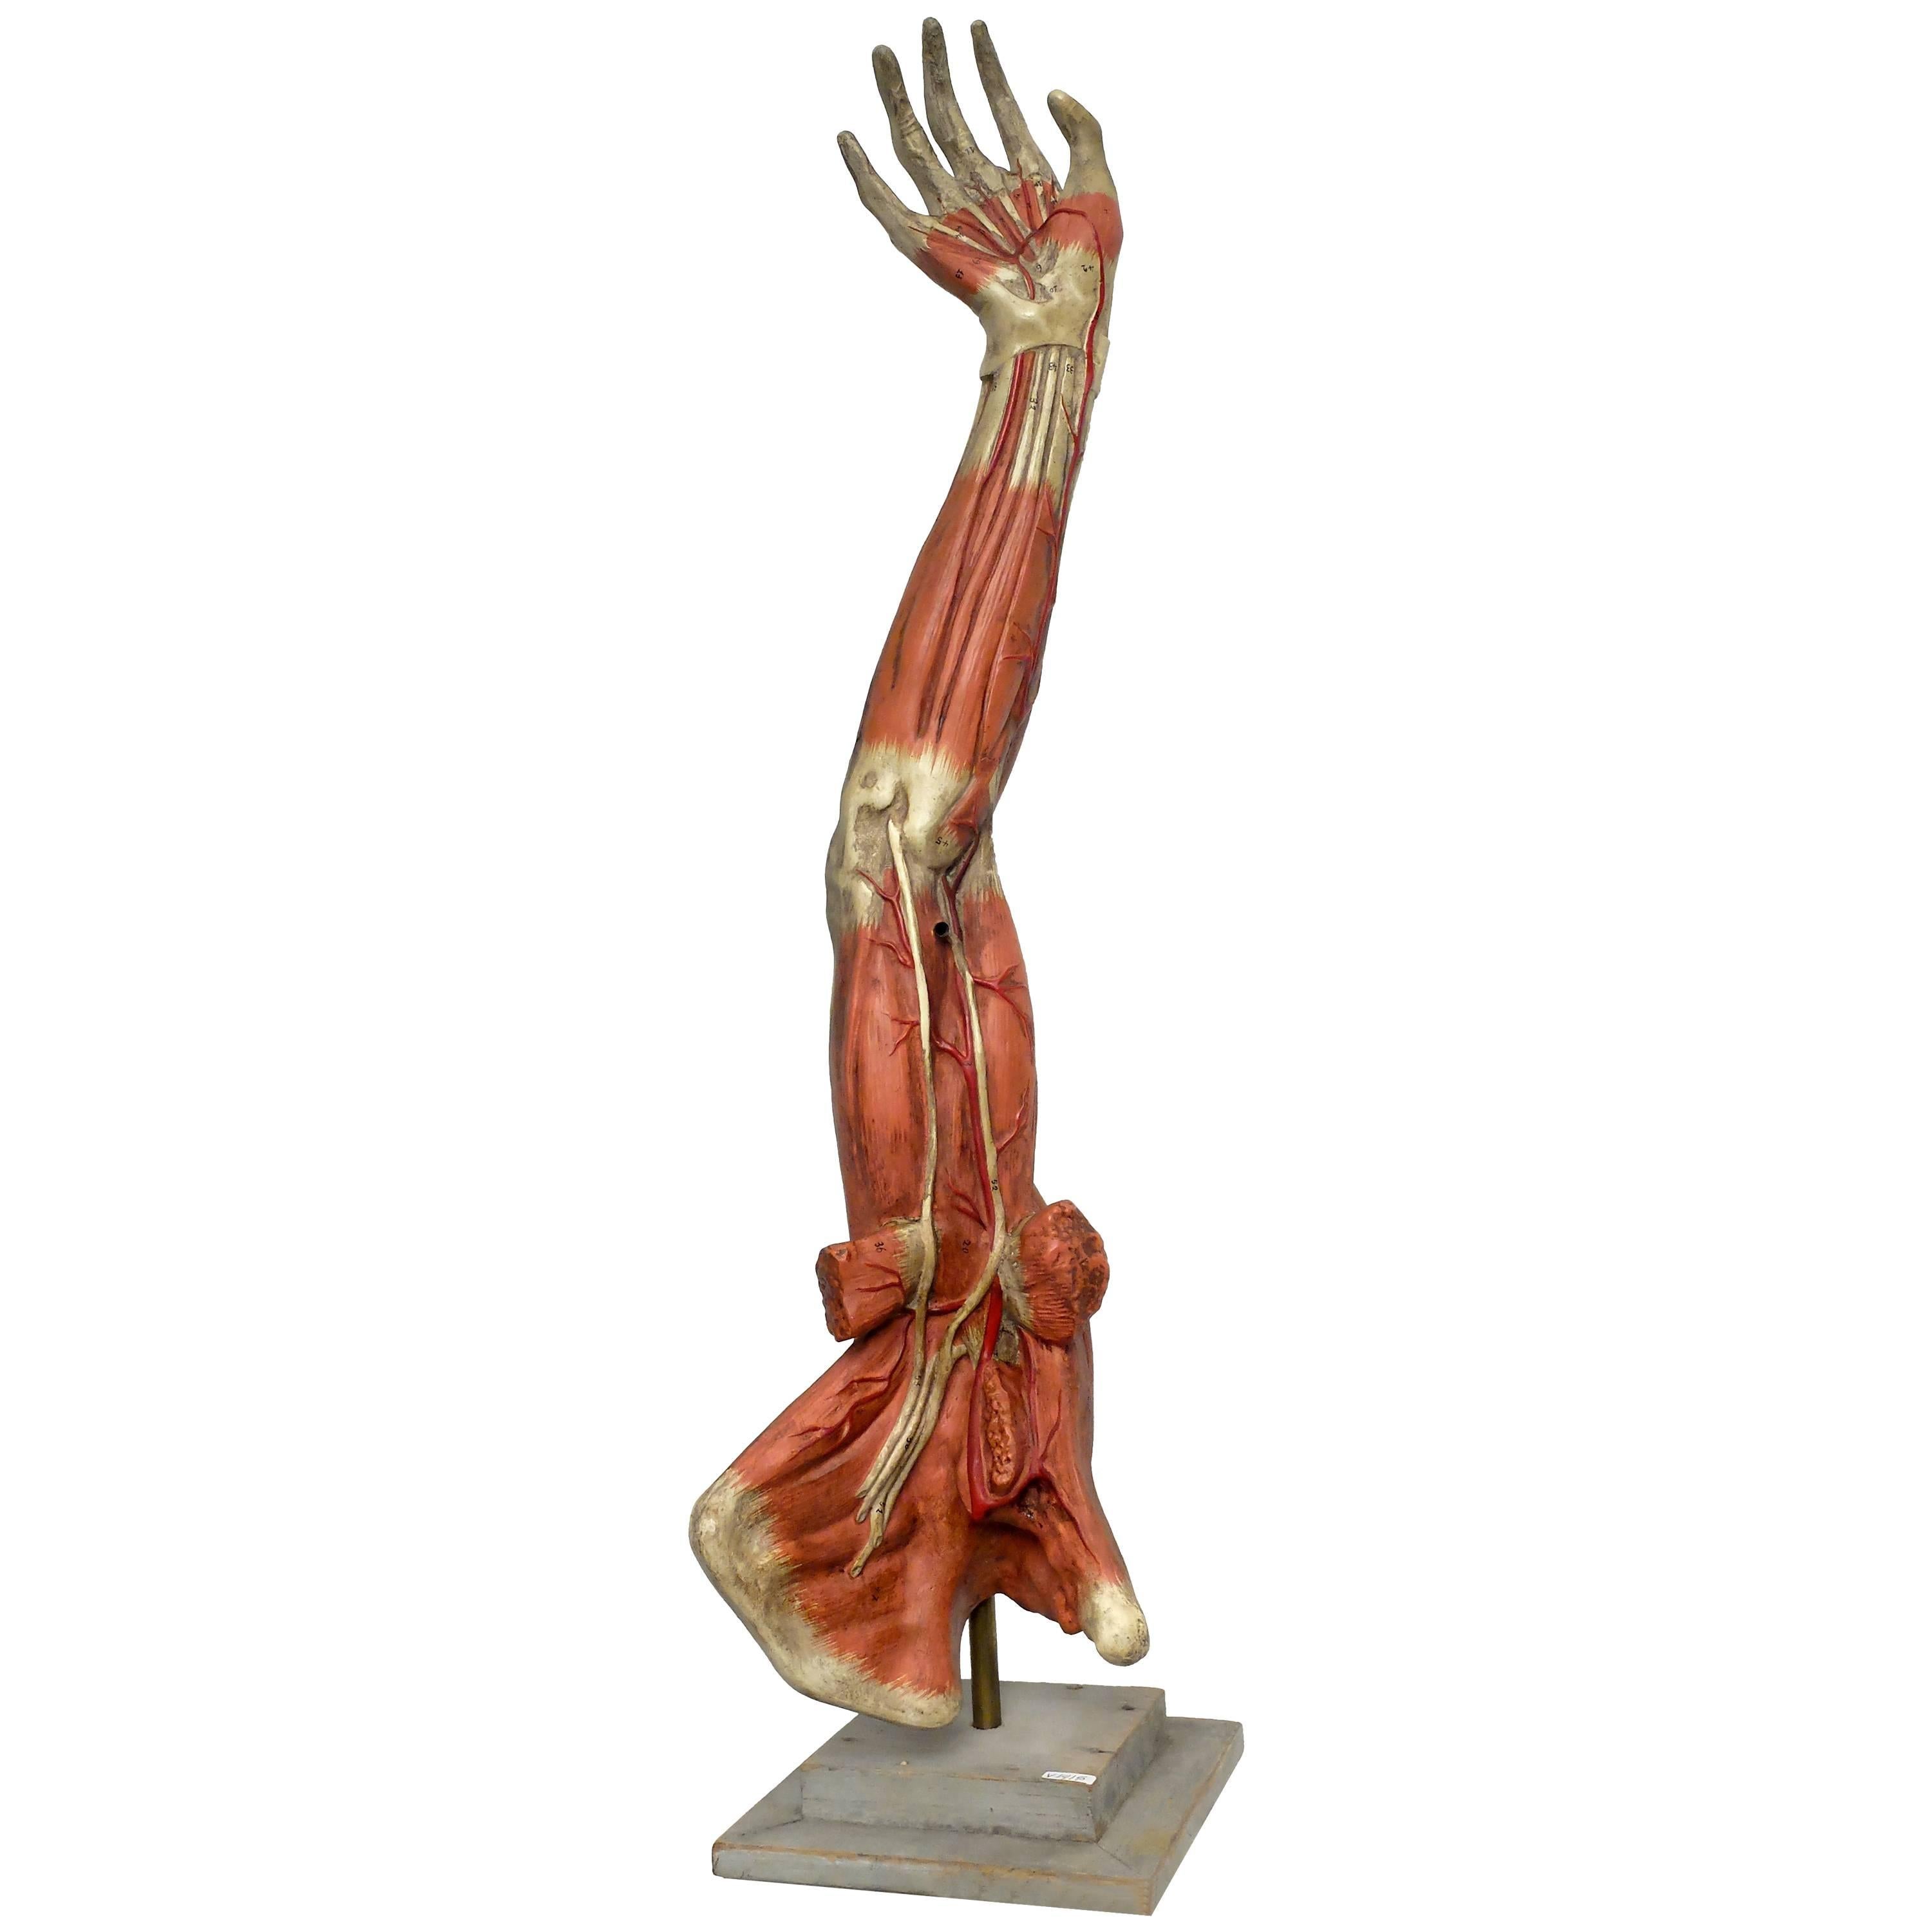 Anatomical Model of an Entire Arm Made by Paravia, Milano, Italy, circa 1890